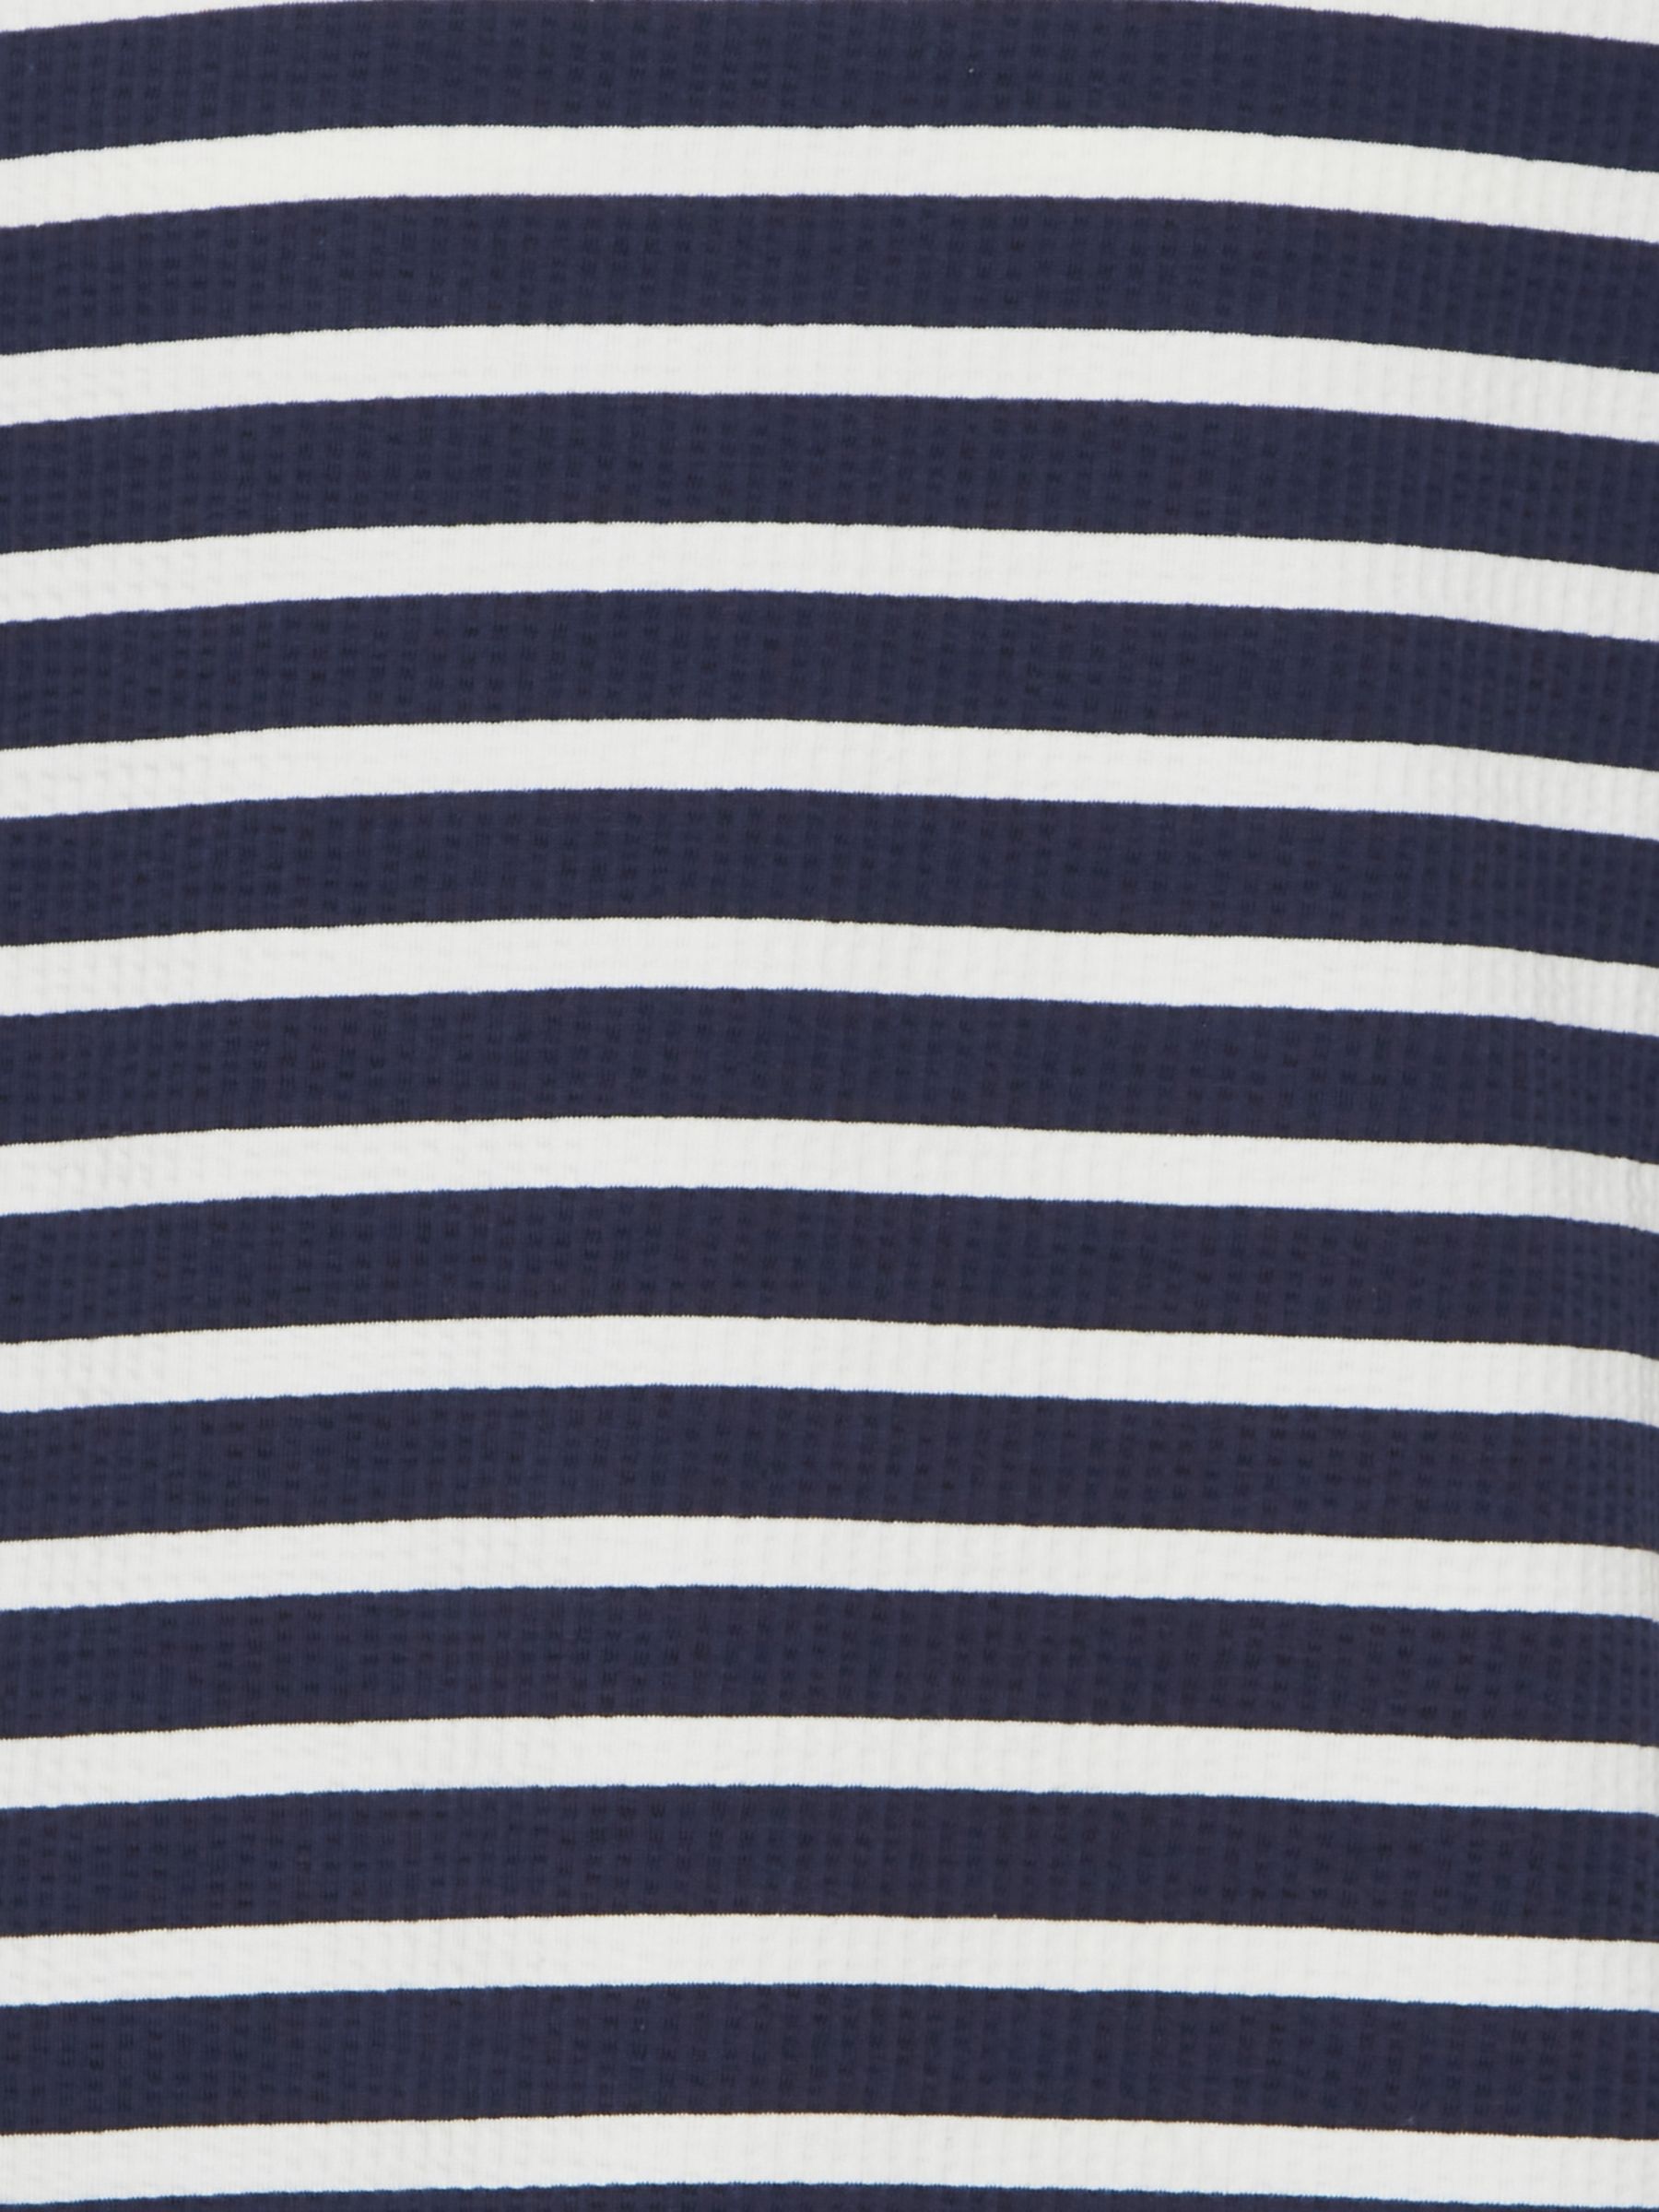 Casual Friday Thor Striped Short Sleeve T-Shirt, White/Navy, S